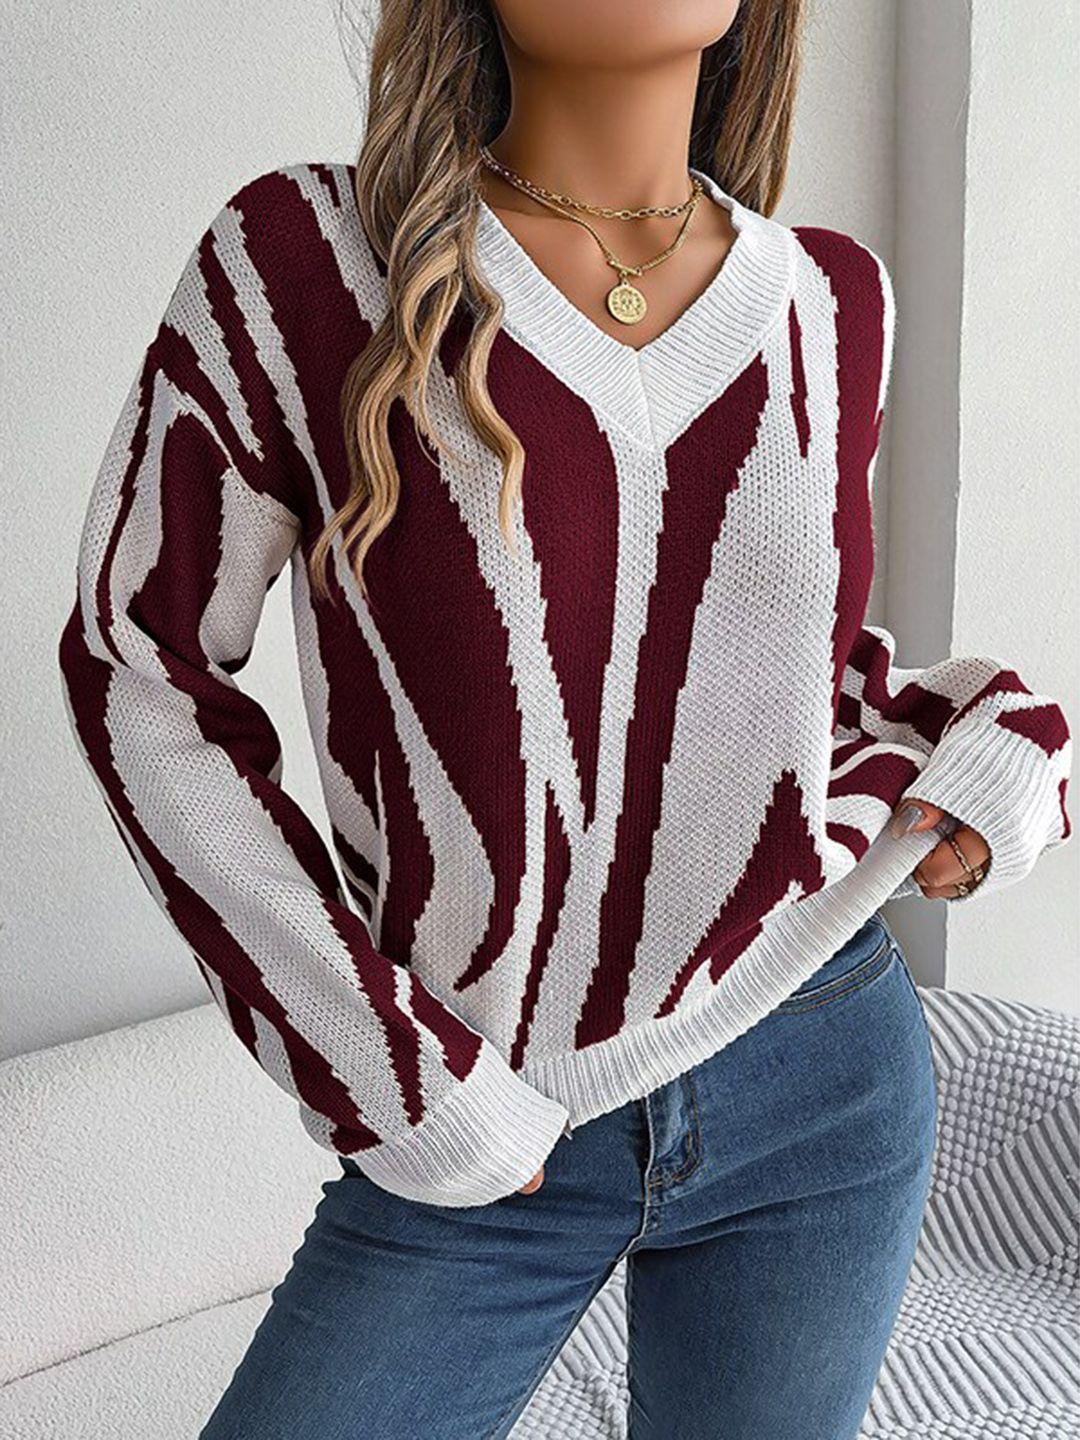 stylecast maroon abstract printed v-neck long sleeves acrylic pullover sweater